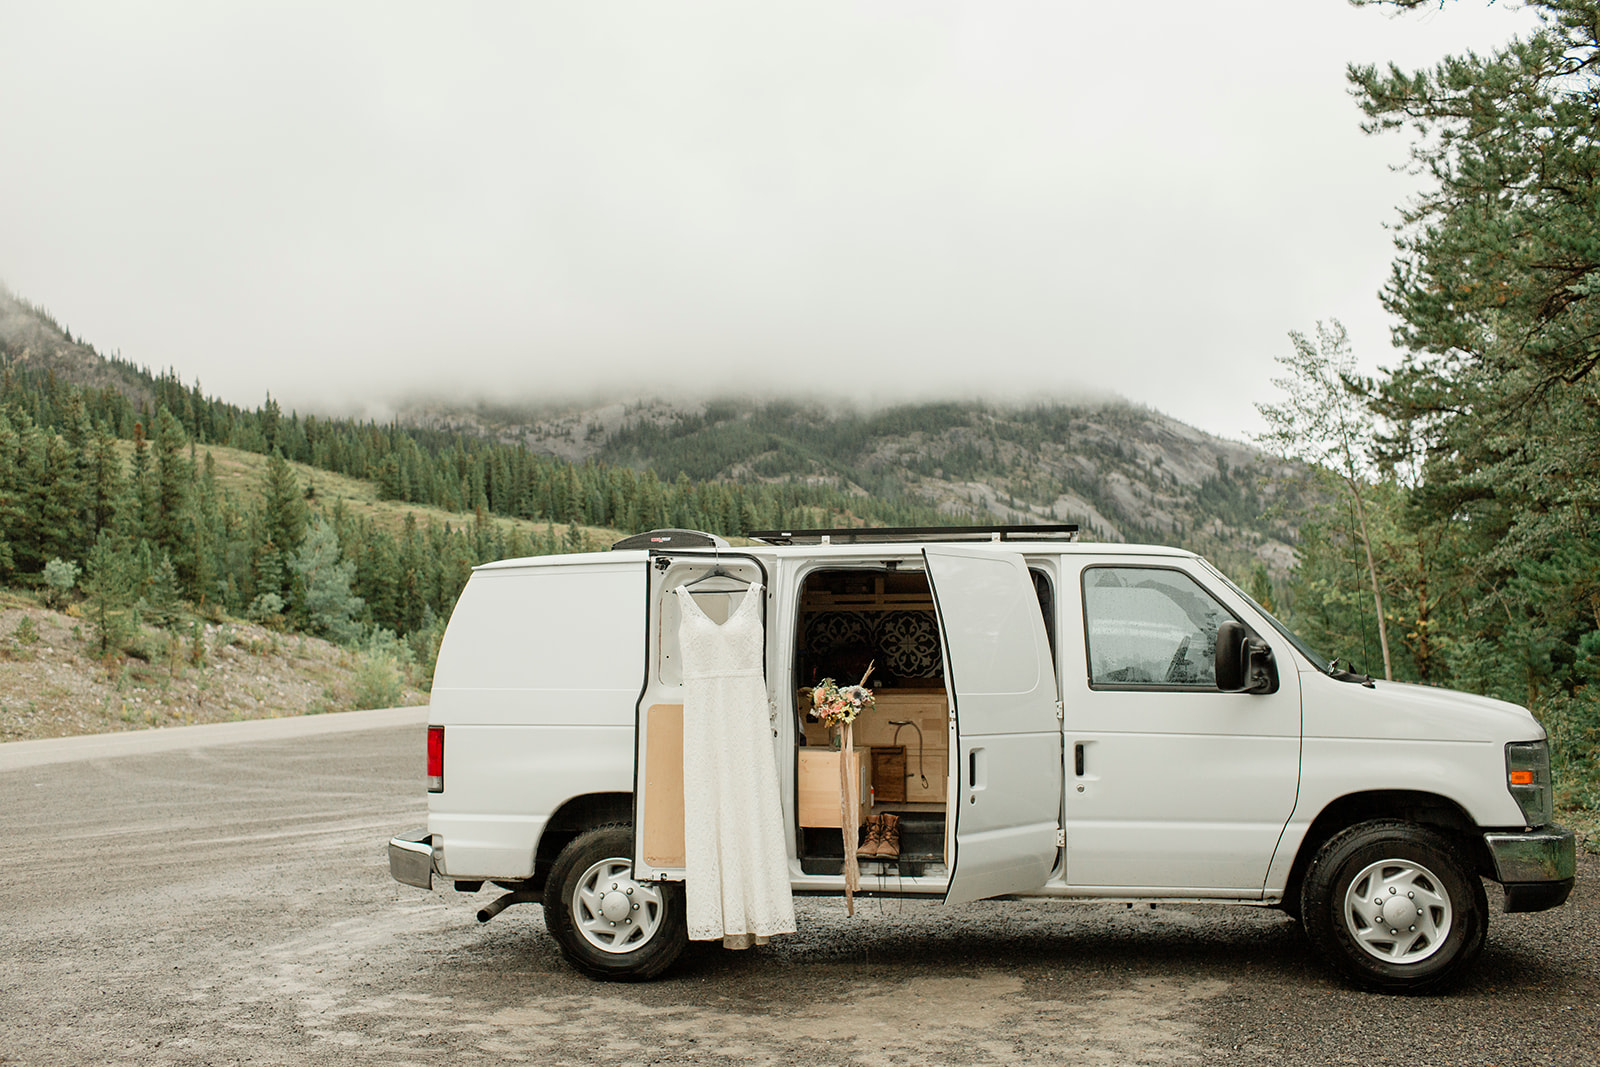 A white van door is parked in Banff National Park for a Banff elopement and it's door open with a wedding dress hanging on it.